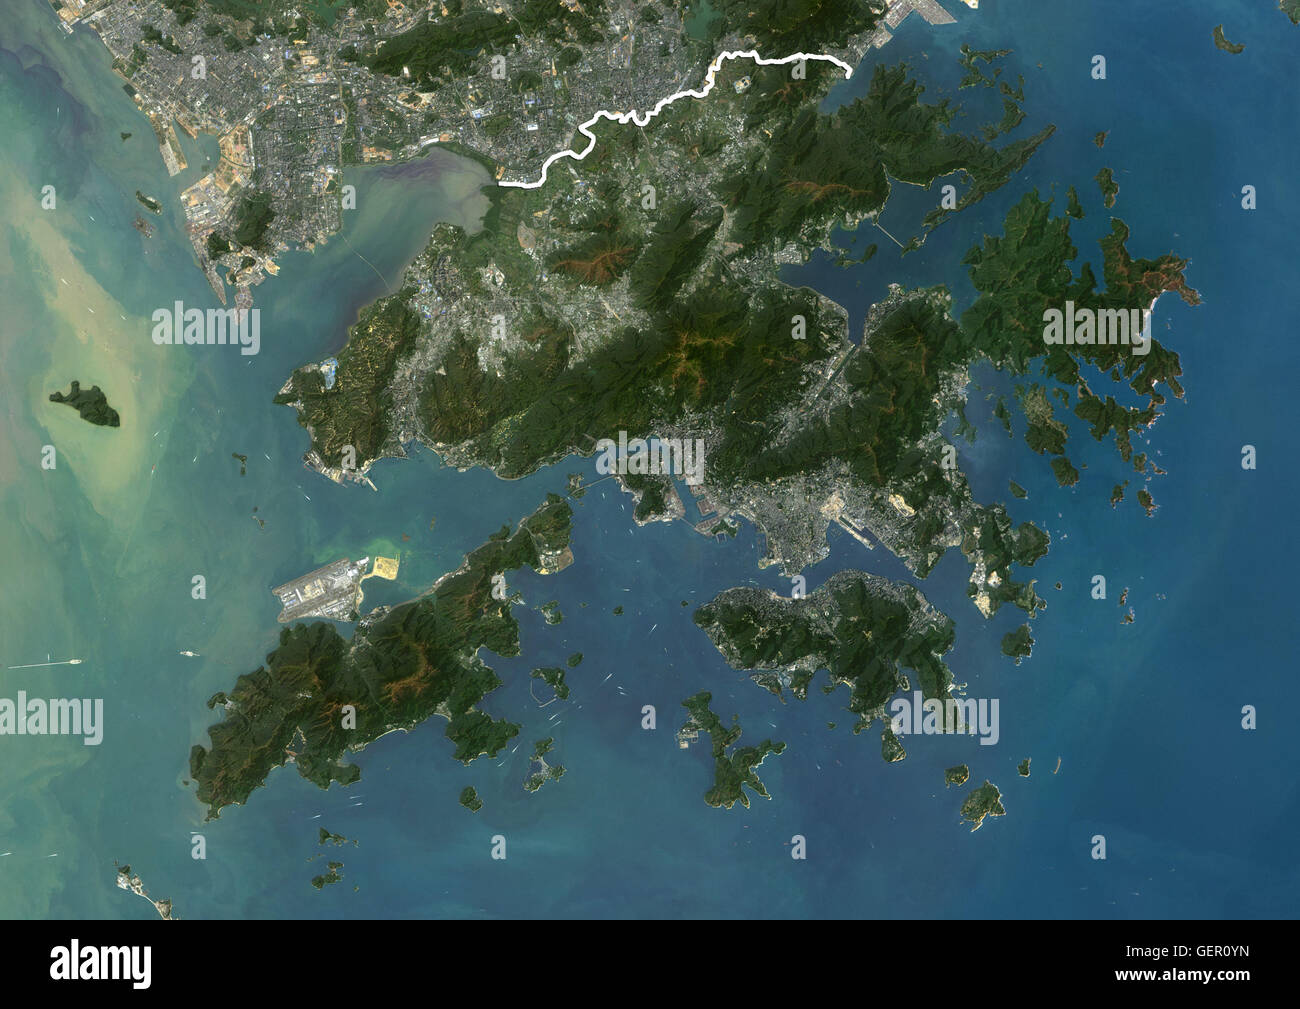 Satellite view of Hong Kong (with country boundaries). This image was compiled from data acquired by Landsat 8 satellite in 2015. Stock Photo